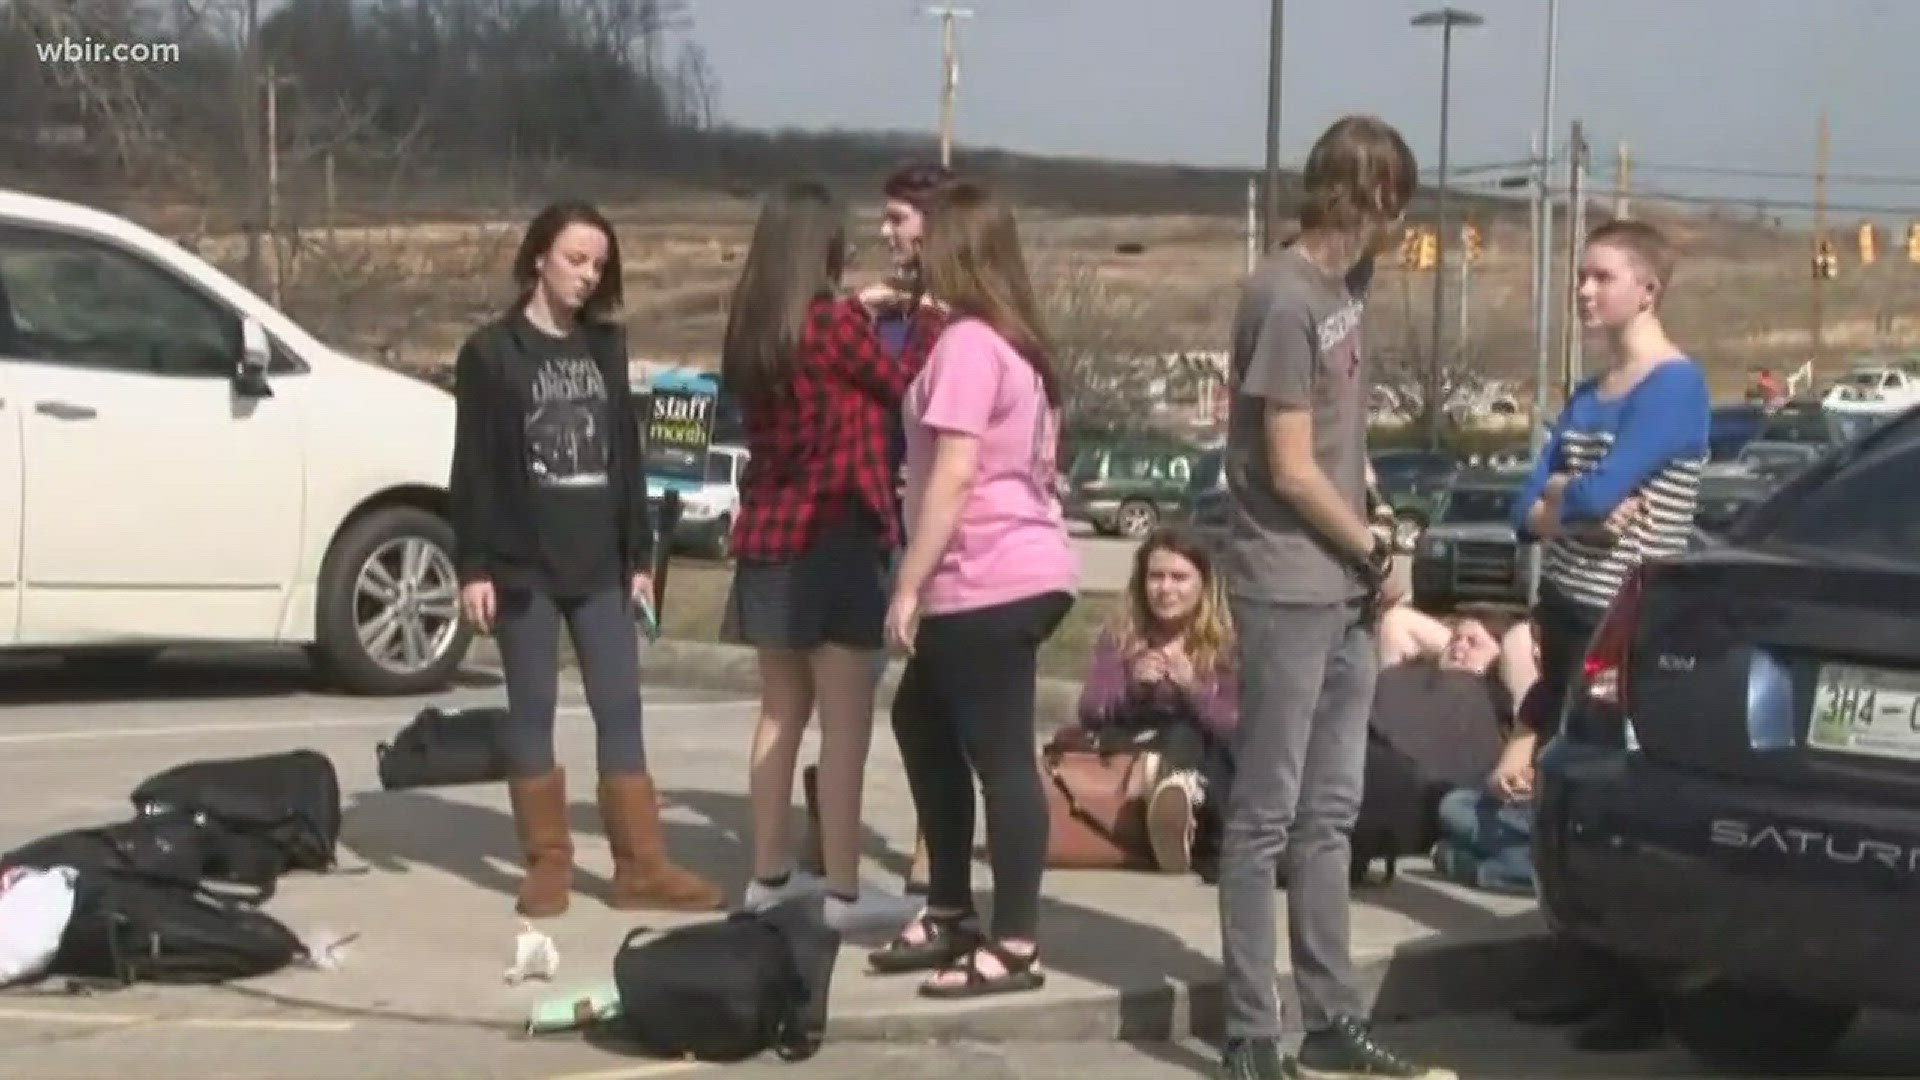 The students say they are concerned about school security and recent school shootings.